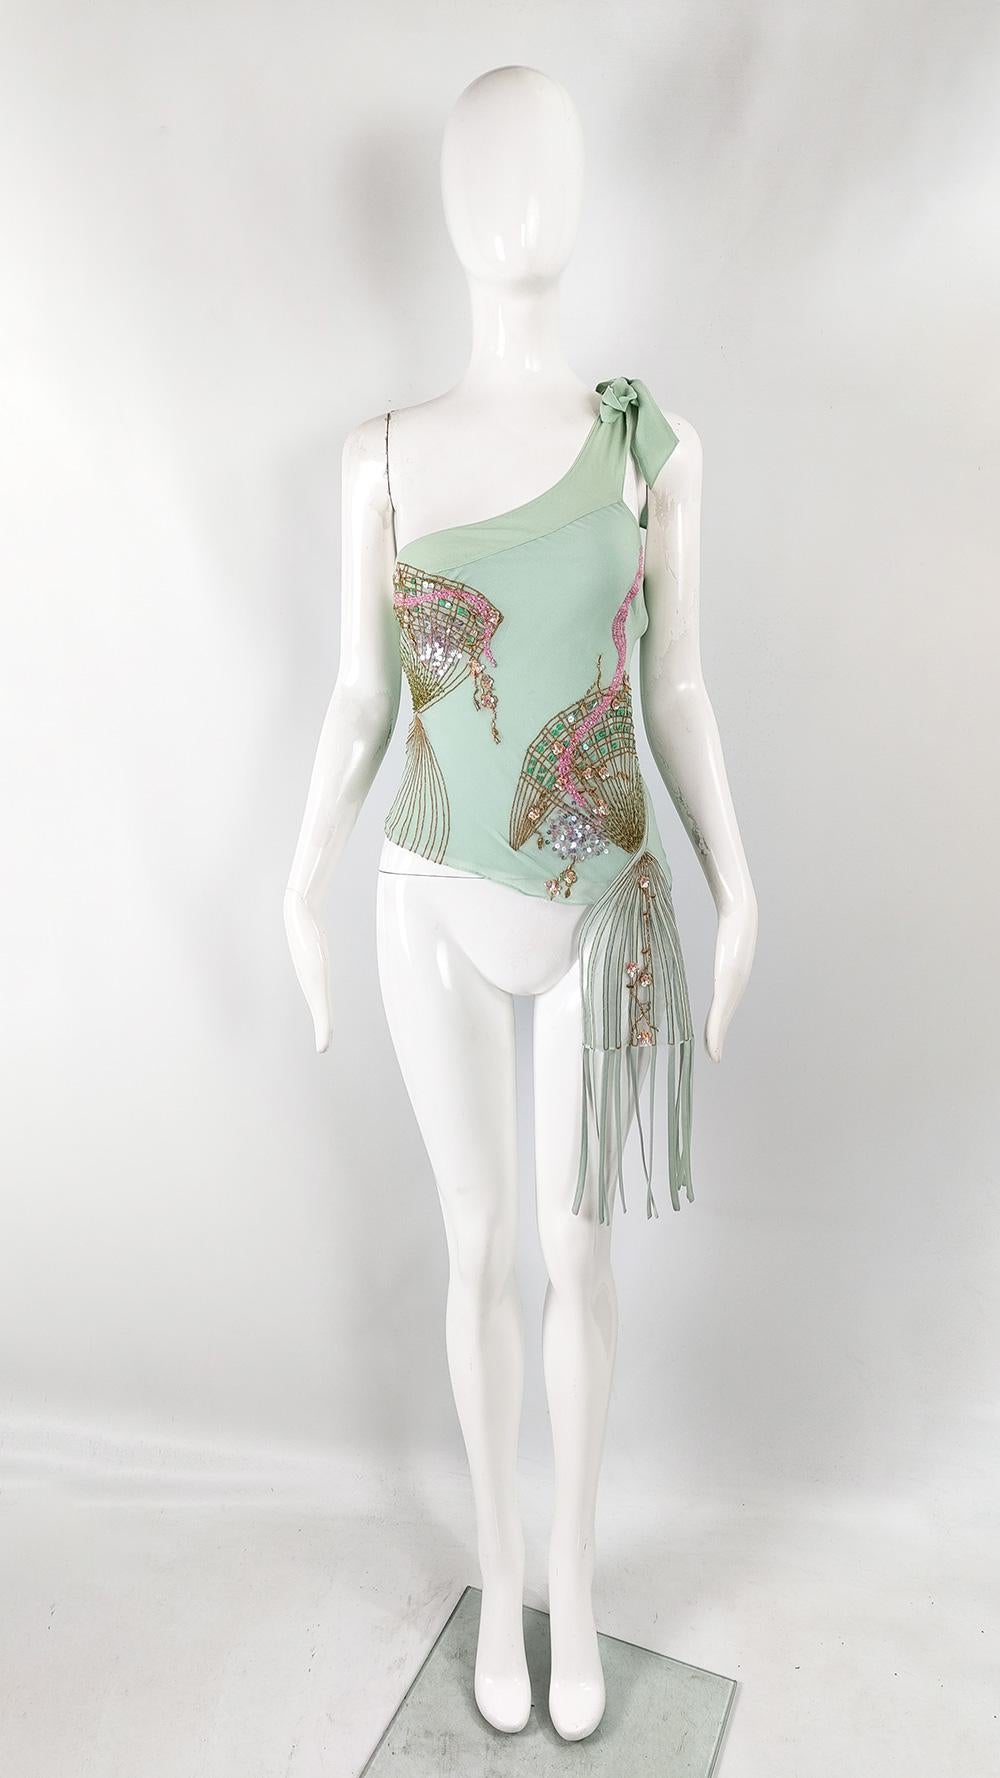 A fabulous and rare vintage womens top from the early 2000s by British label, Karen Millen. In an aqua / pastel turquoise pure silk fabric. It has an asymmetrical, one shouldered design with a tulle mesh on the same side with fringing draping down